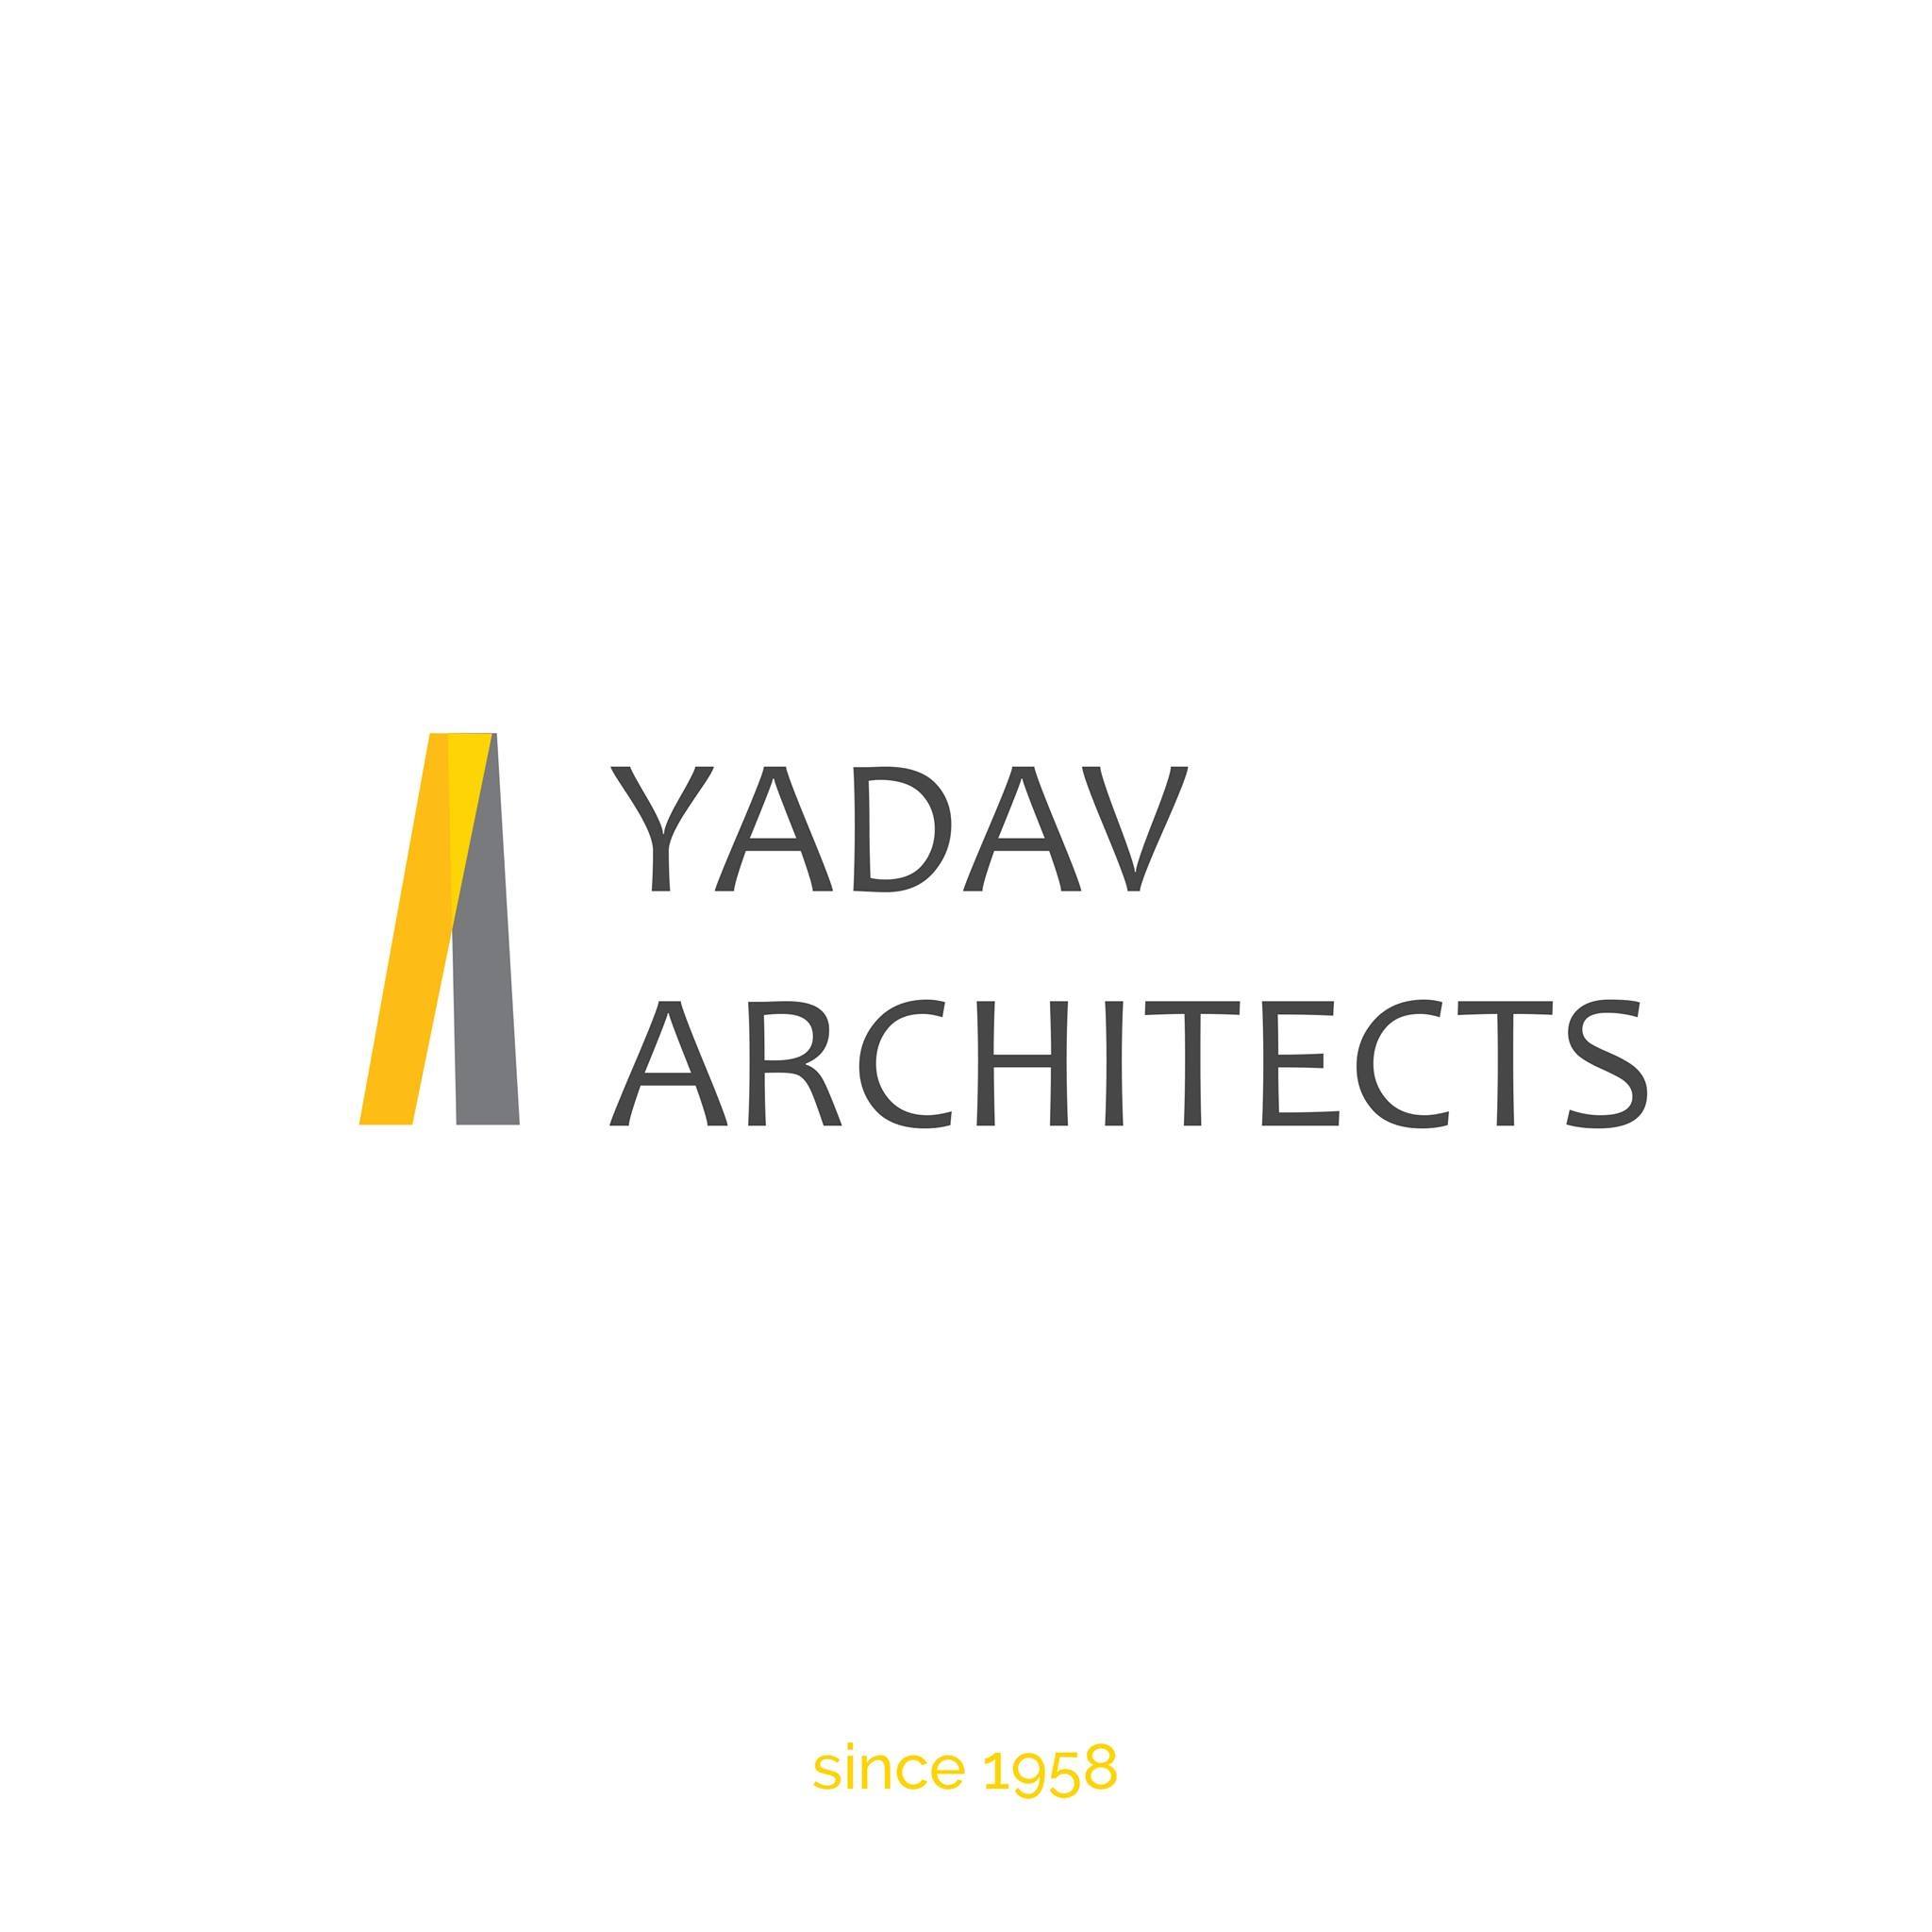 Yadav Architects|Accounting Services|Professional Services